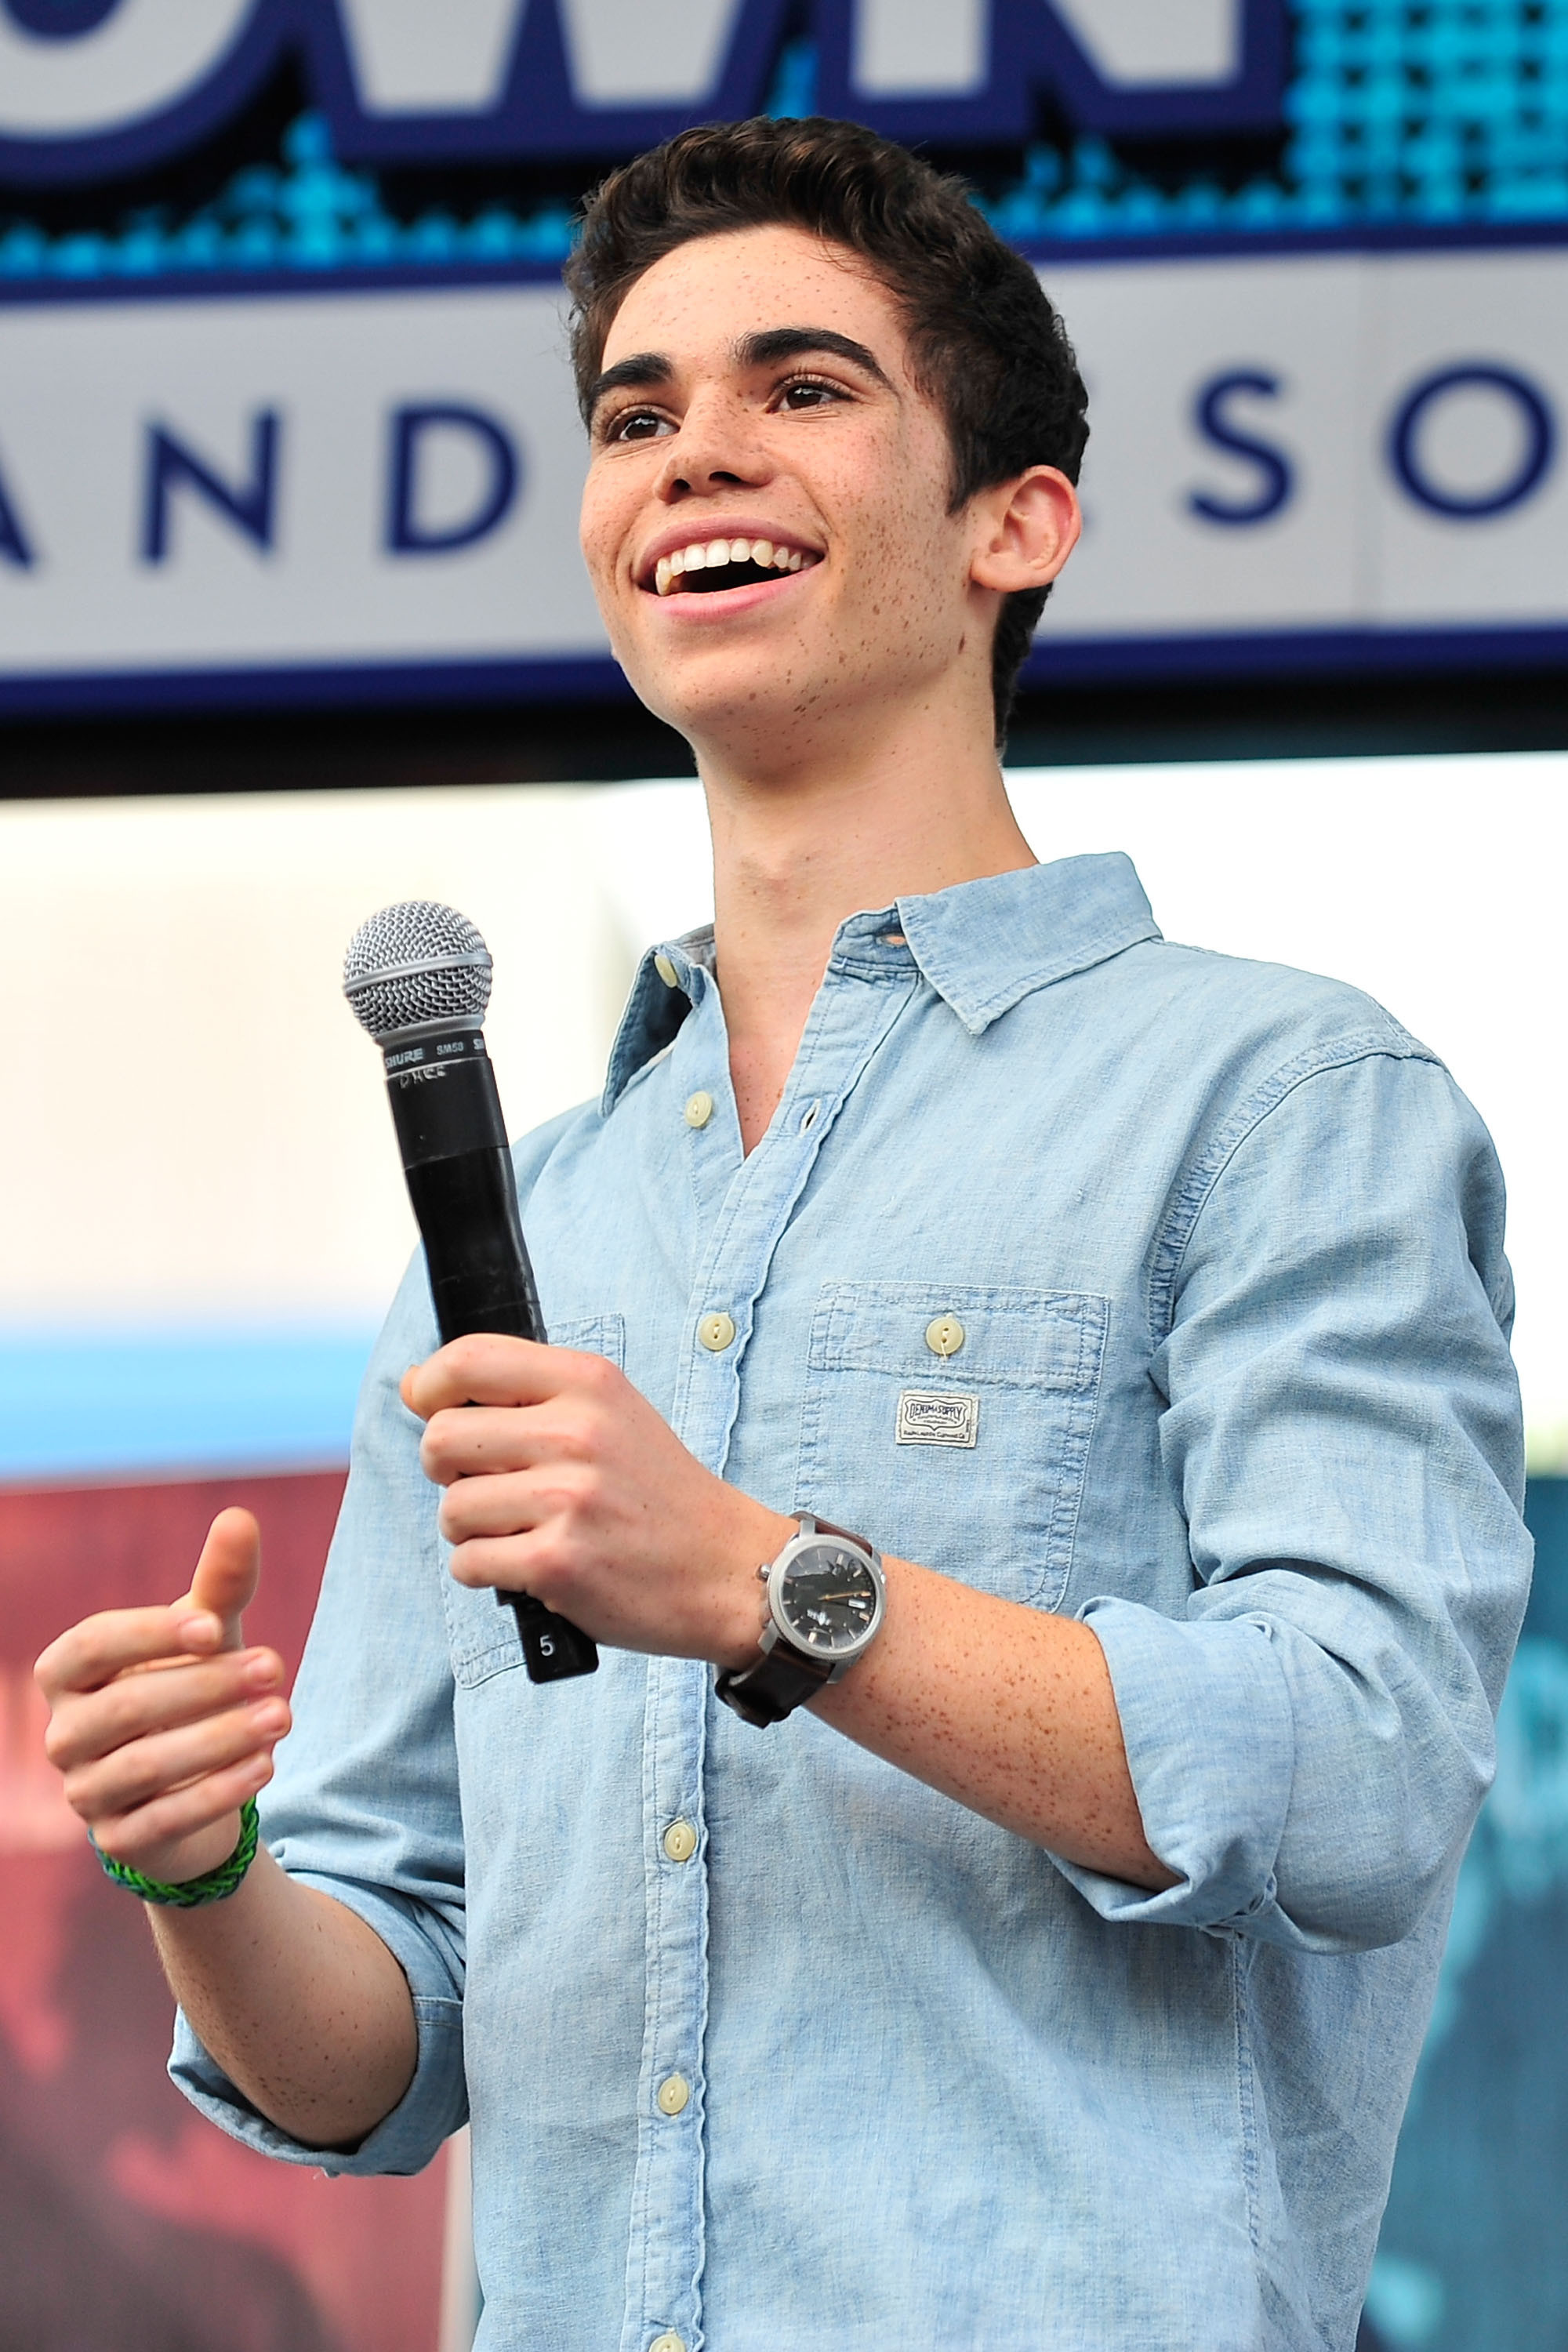 2000x3000 Cameron Boyce wallpapers, Celebrity, HQ Cameron Boyce pictures | 4K .